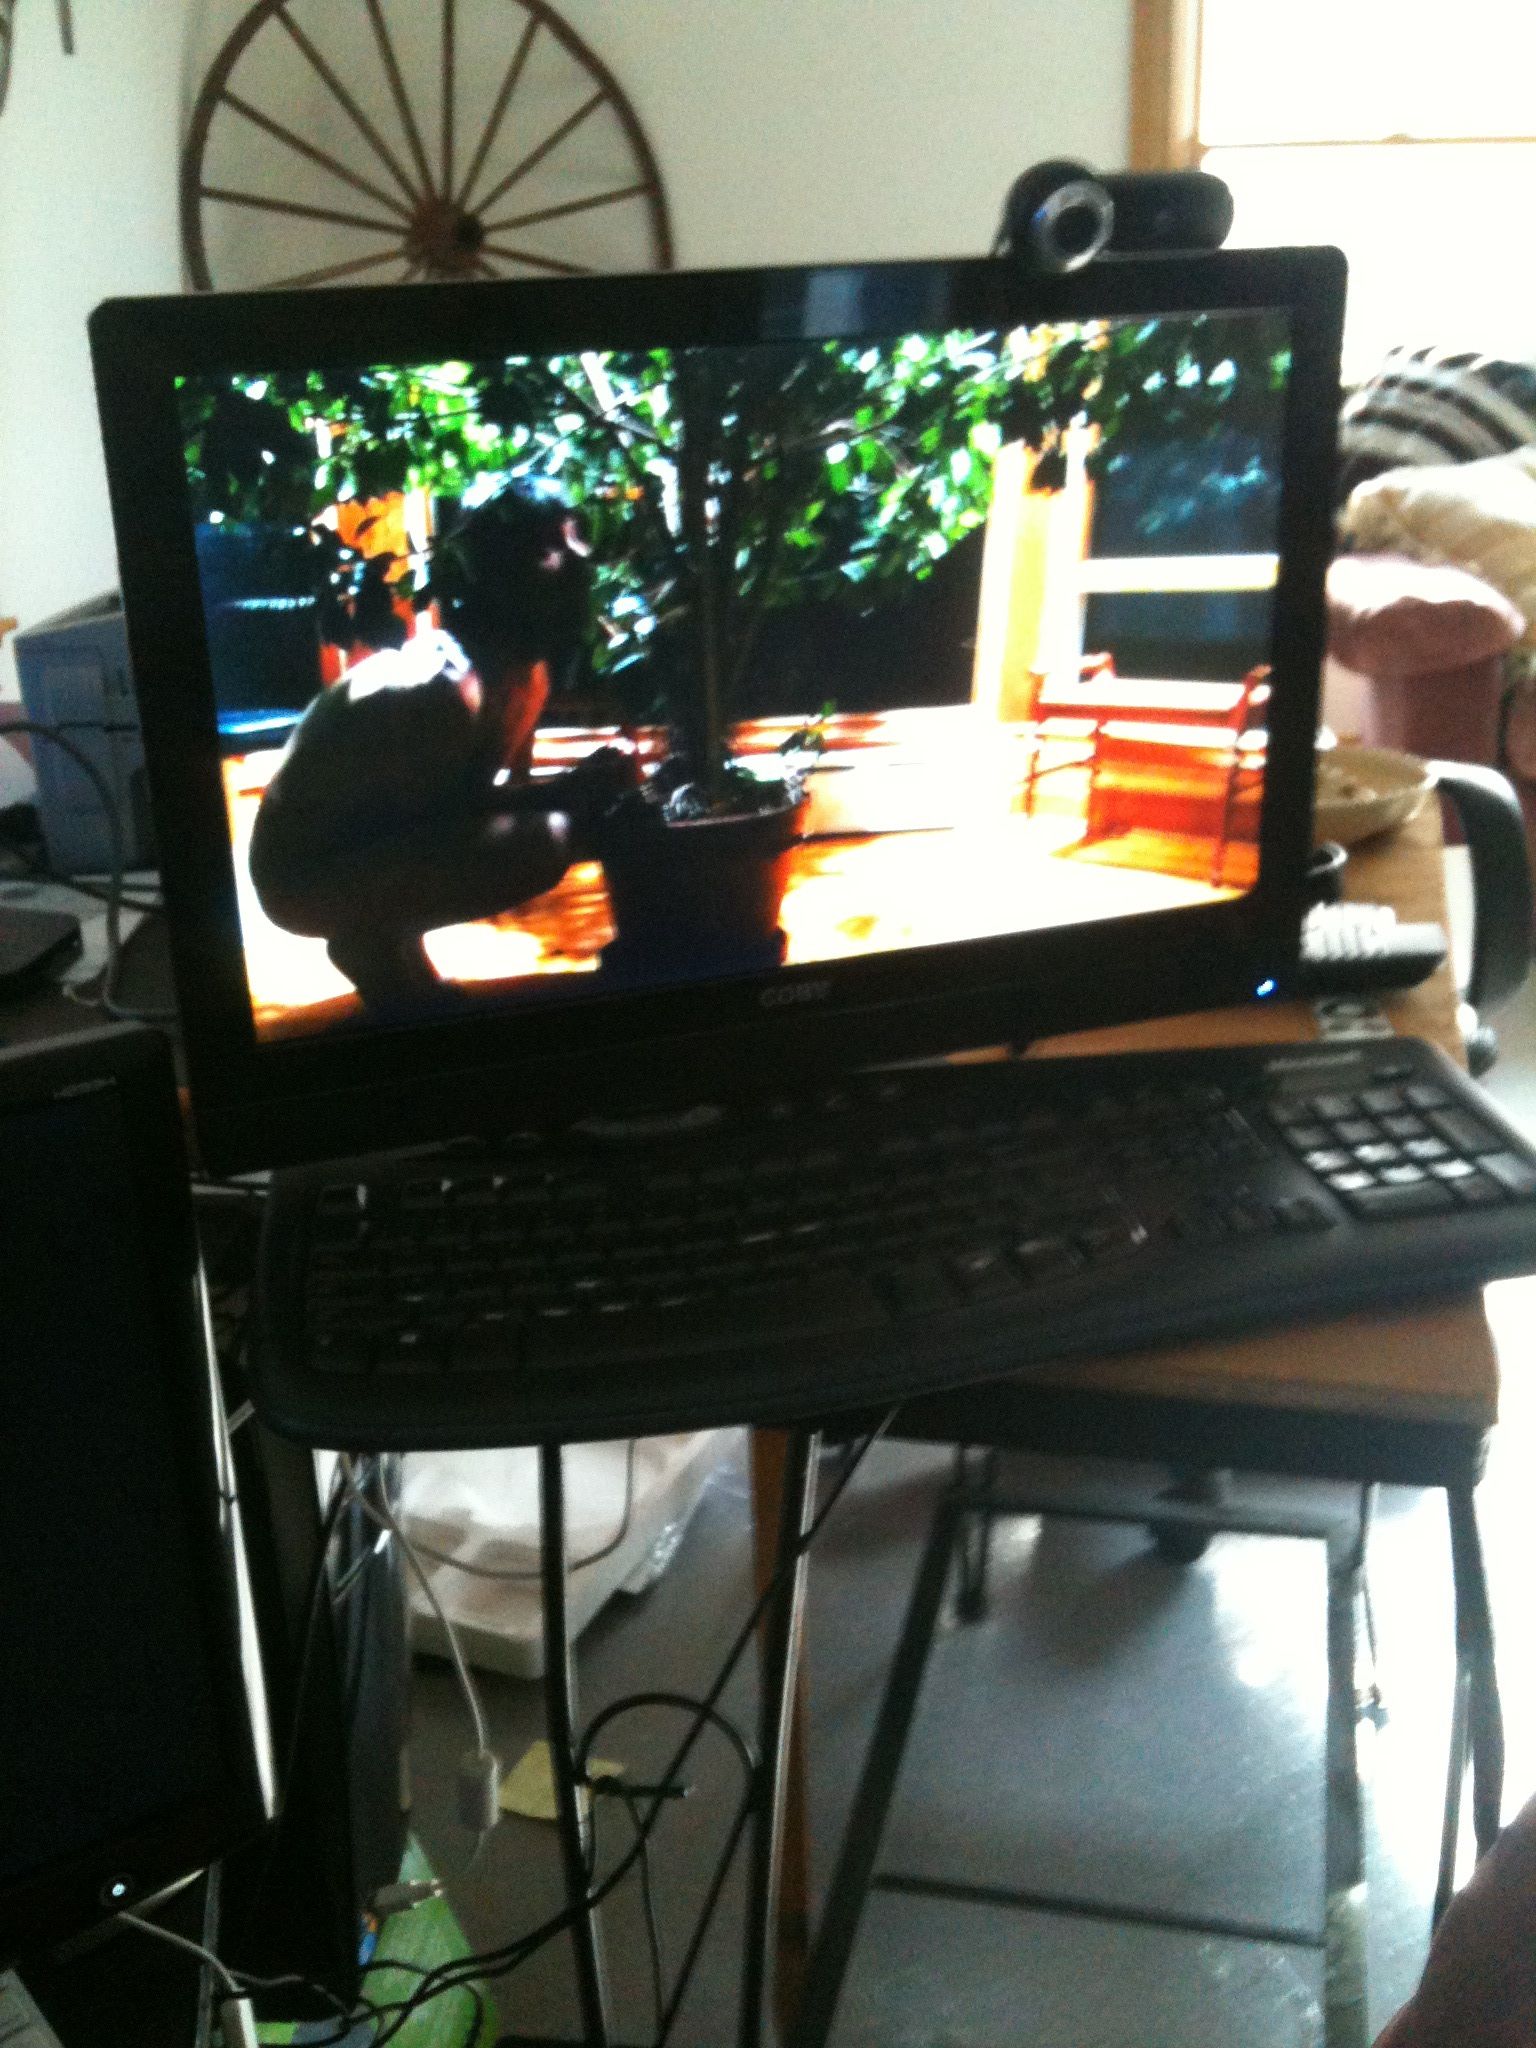 there is a small television monitor being attached to a laptop